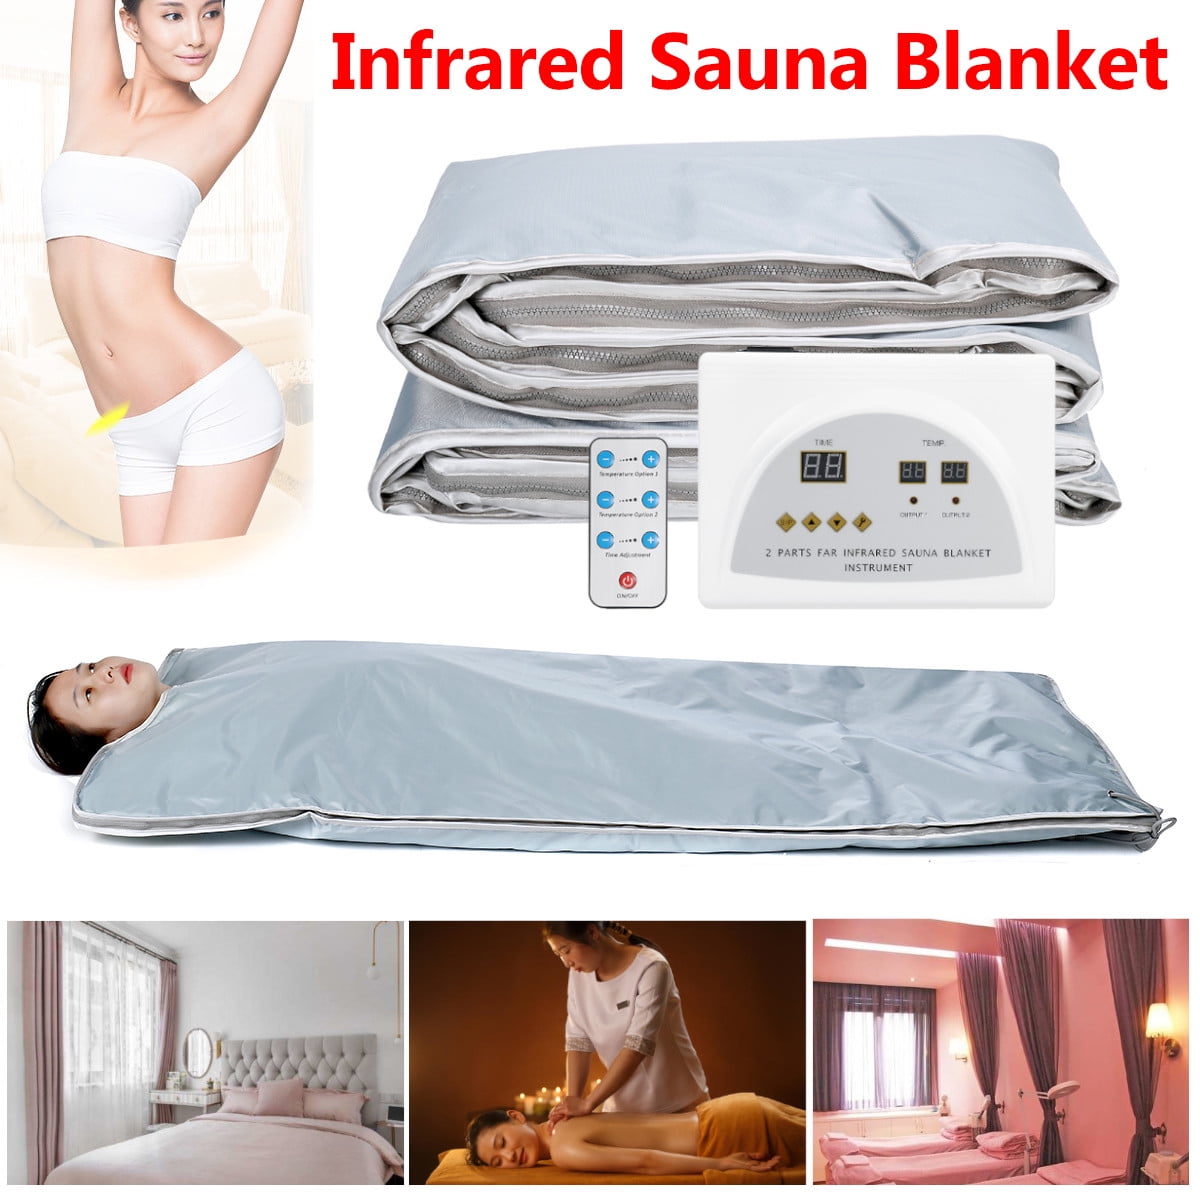 Far Infrared Sauna Blanket 110V Waterproof Detoxification Blanket with Safety Switch Used As Home Sauna for Body Shape Slimming Fitness US